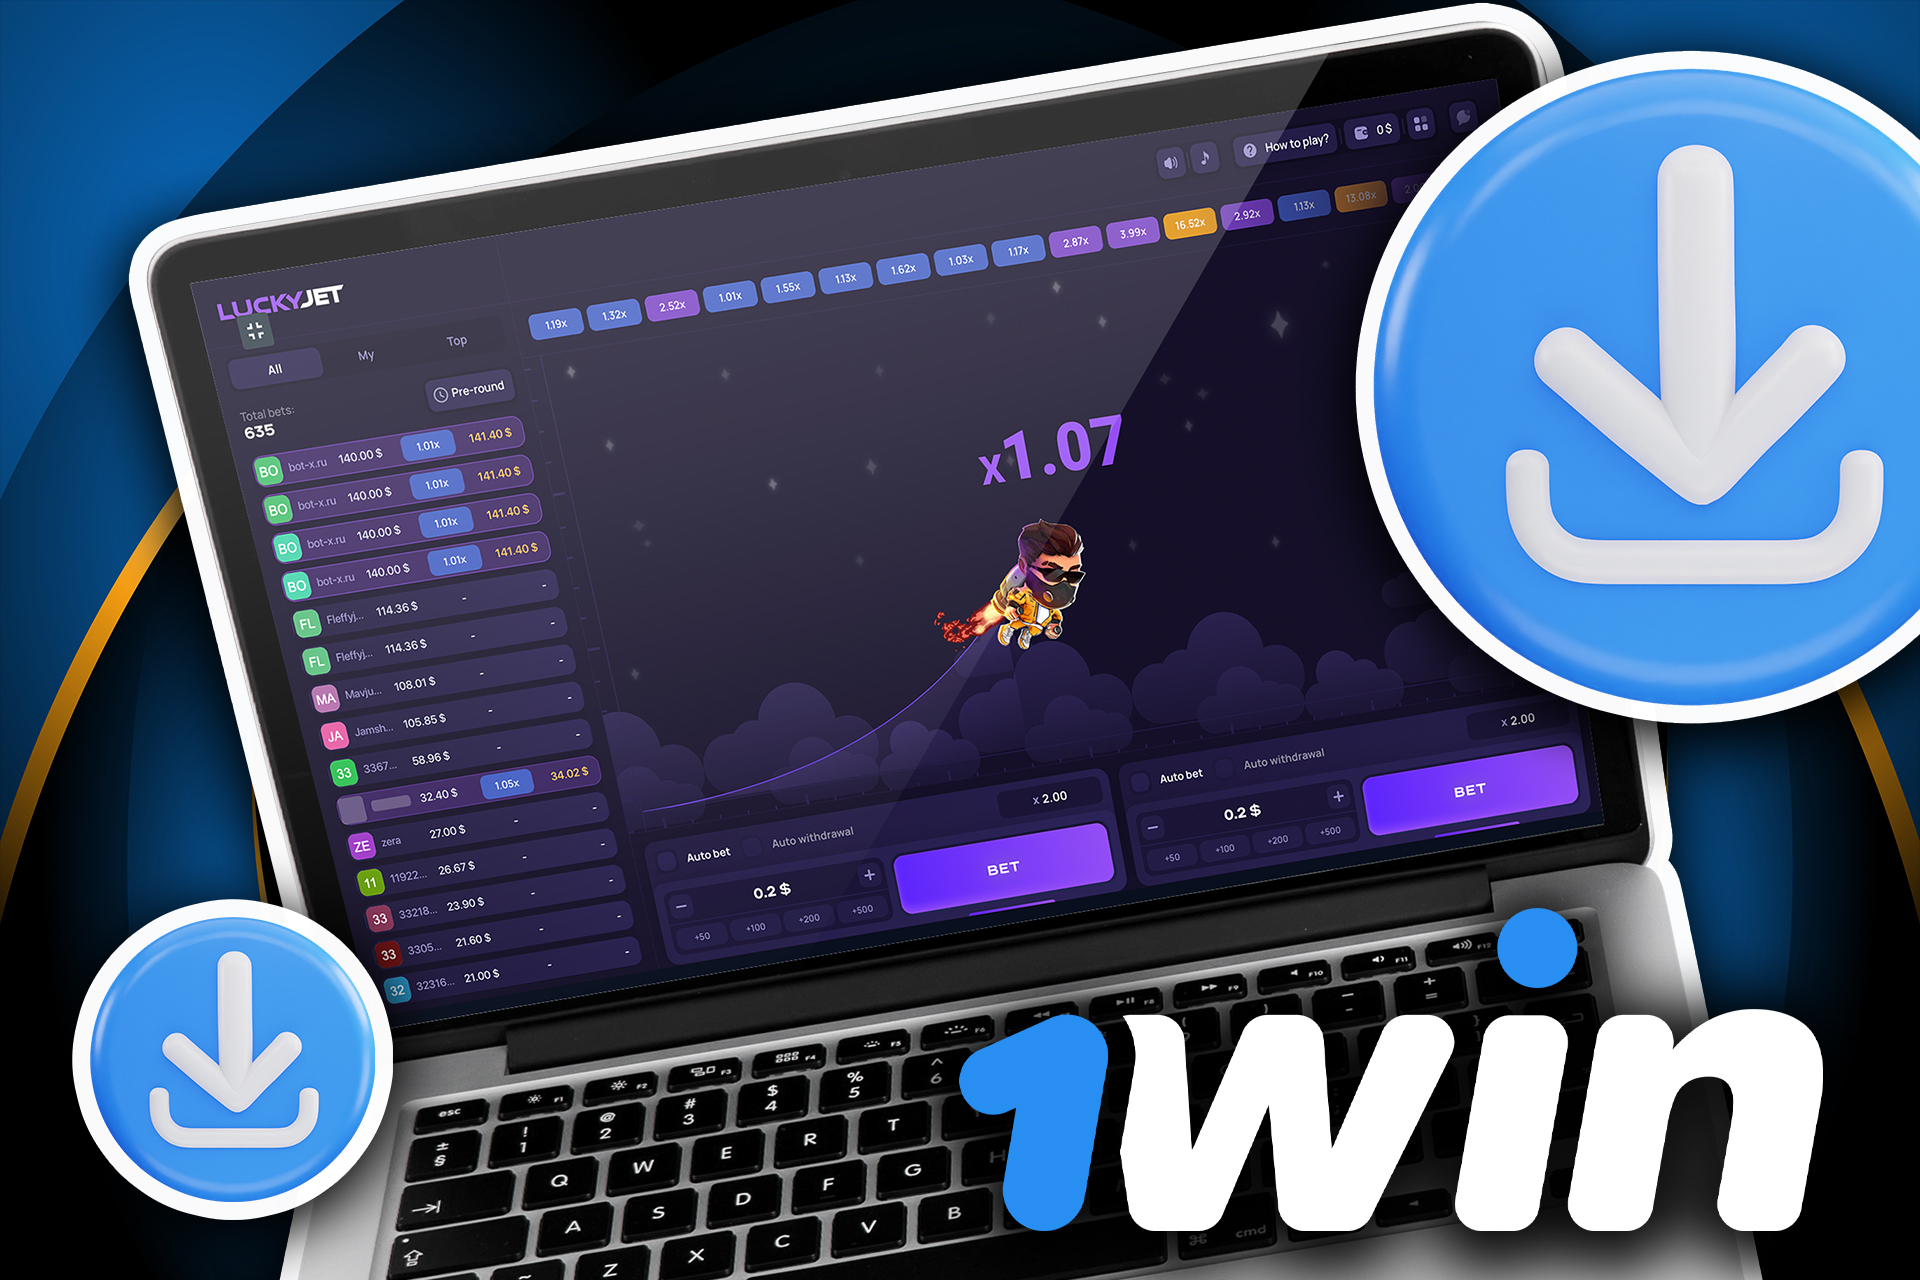 You can also download the desktop version of 1win and play the game on your laptop.